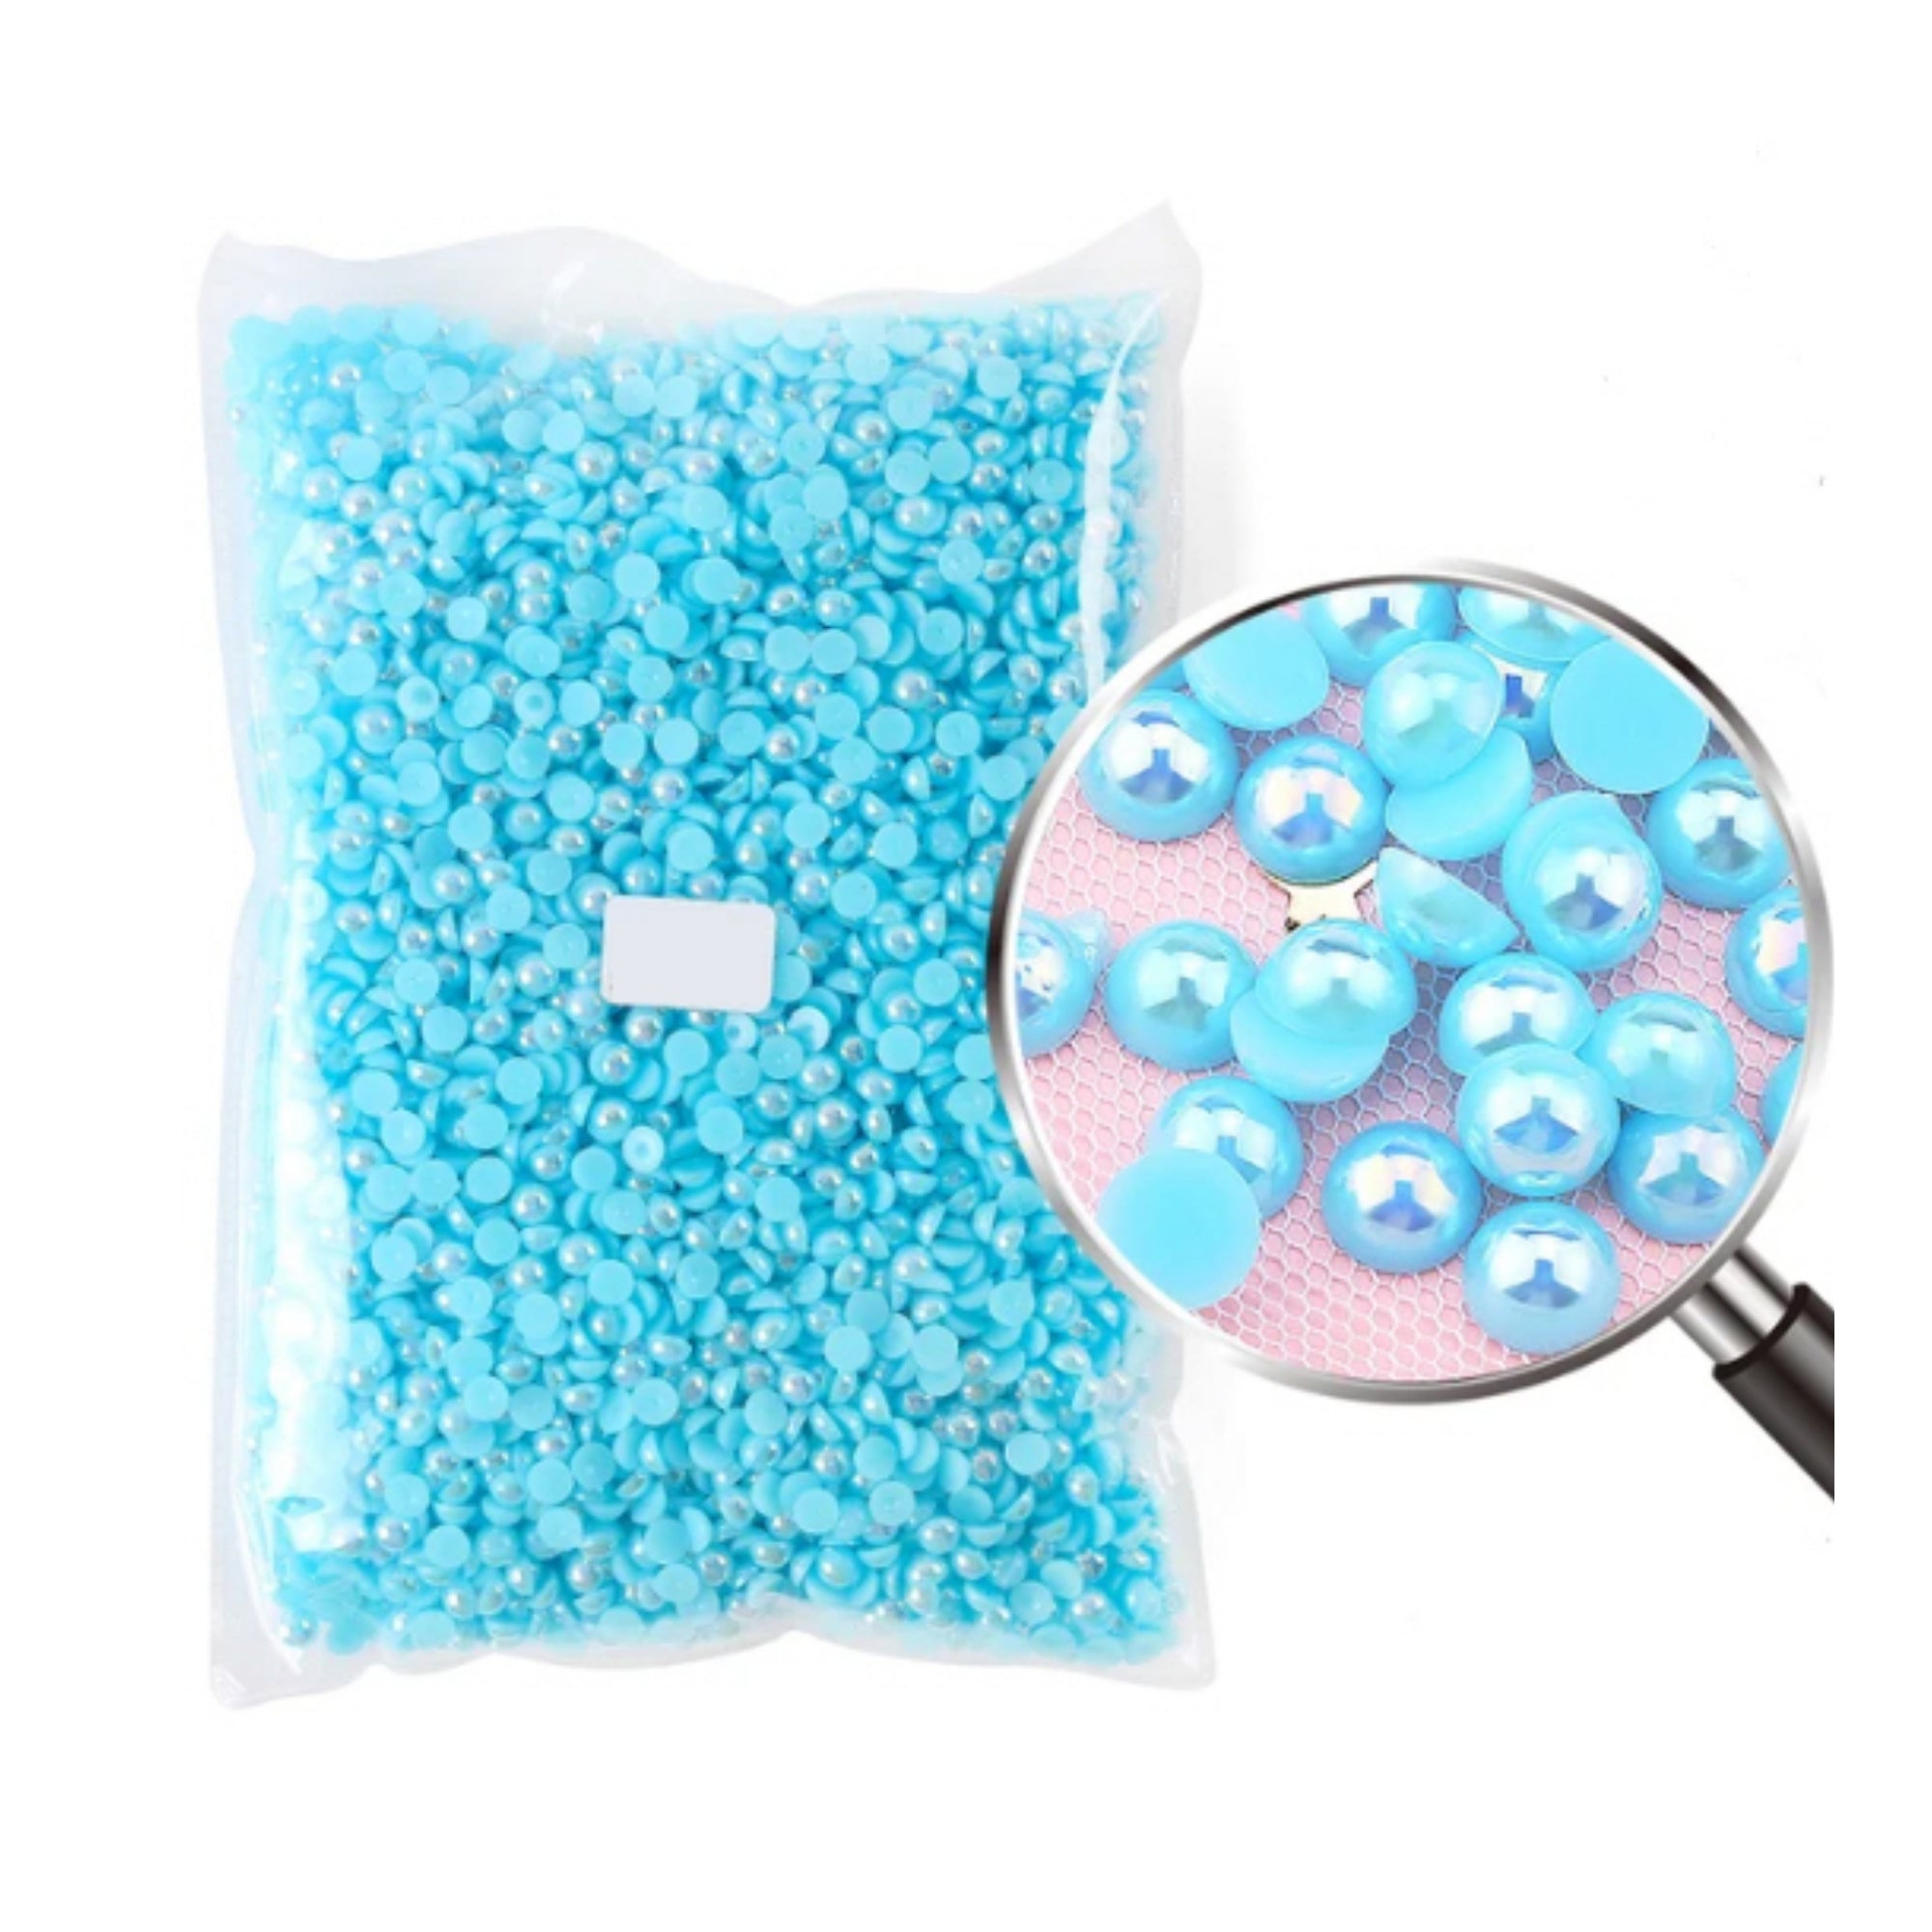 Blue Iridescent 6mm AB Flatback Pearls Collection by SSC Designs - 100/Package